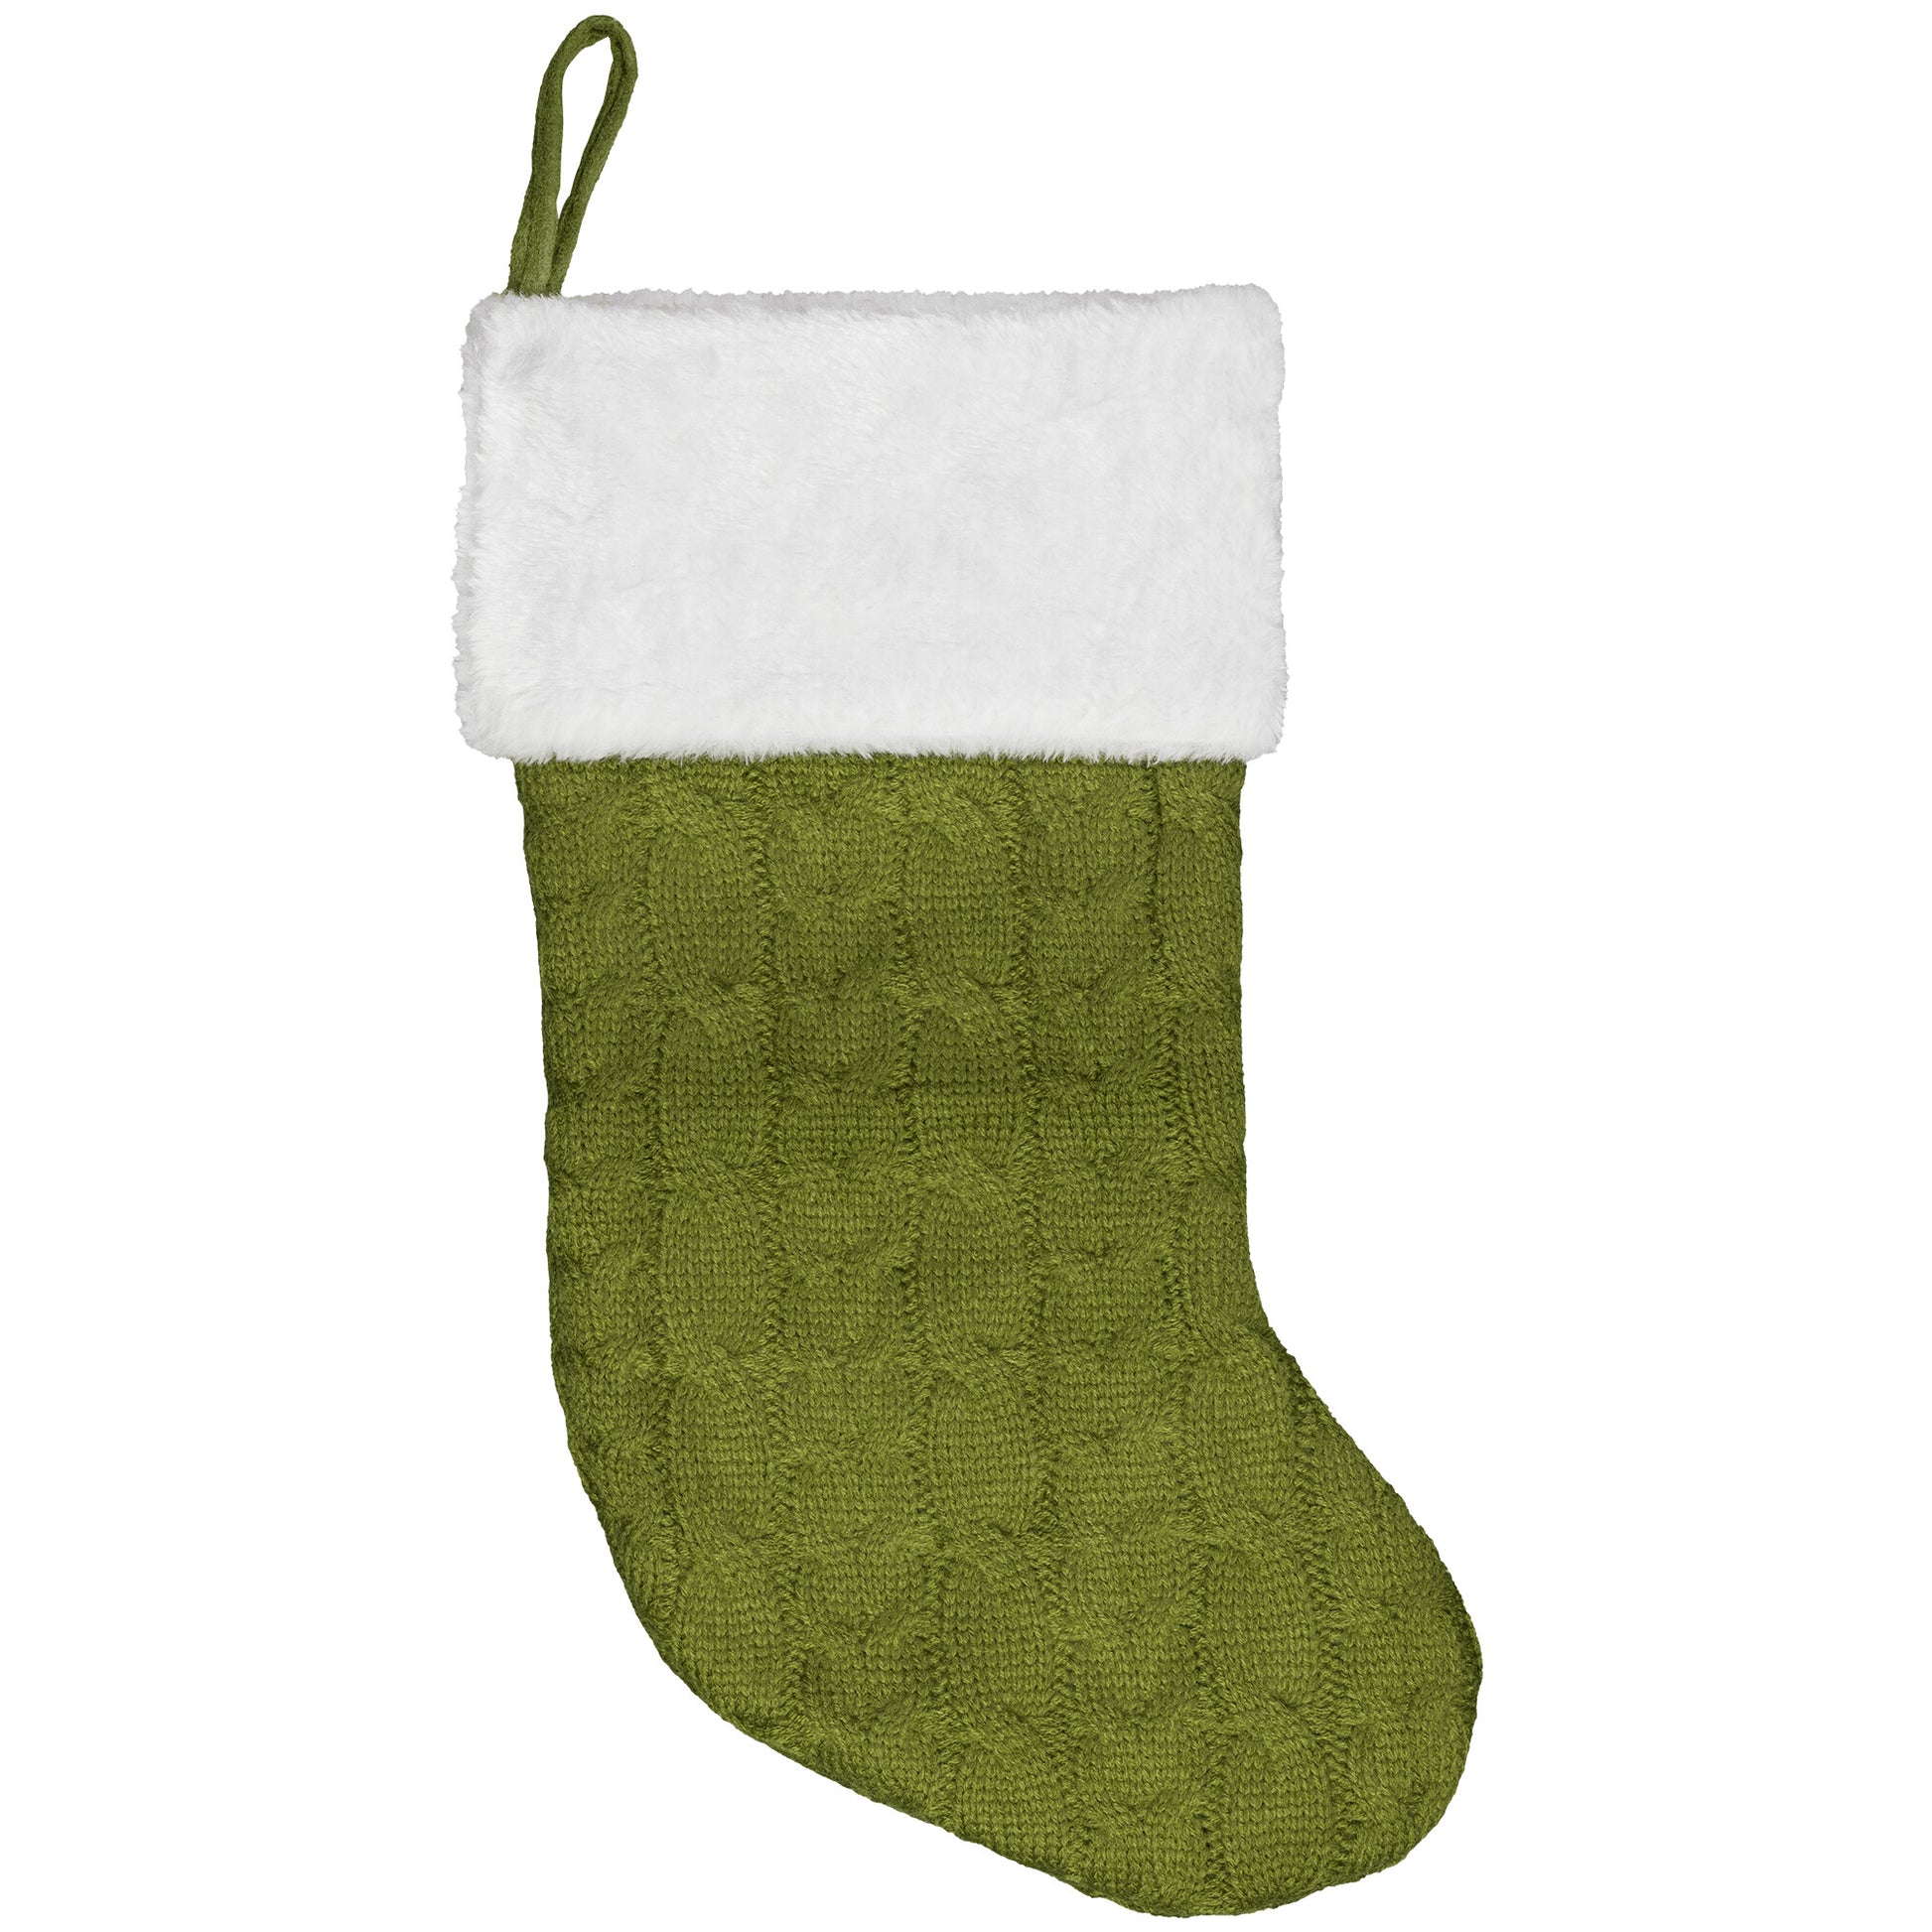 Custom Embroidered Christmas Stocking green on white background